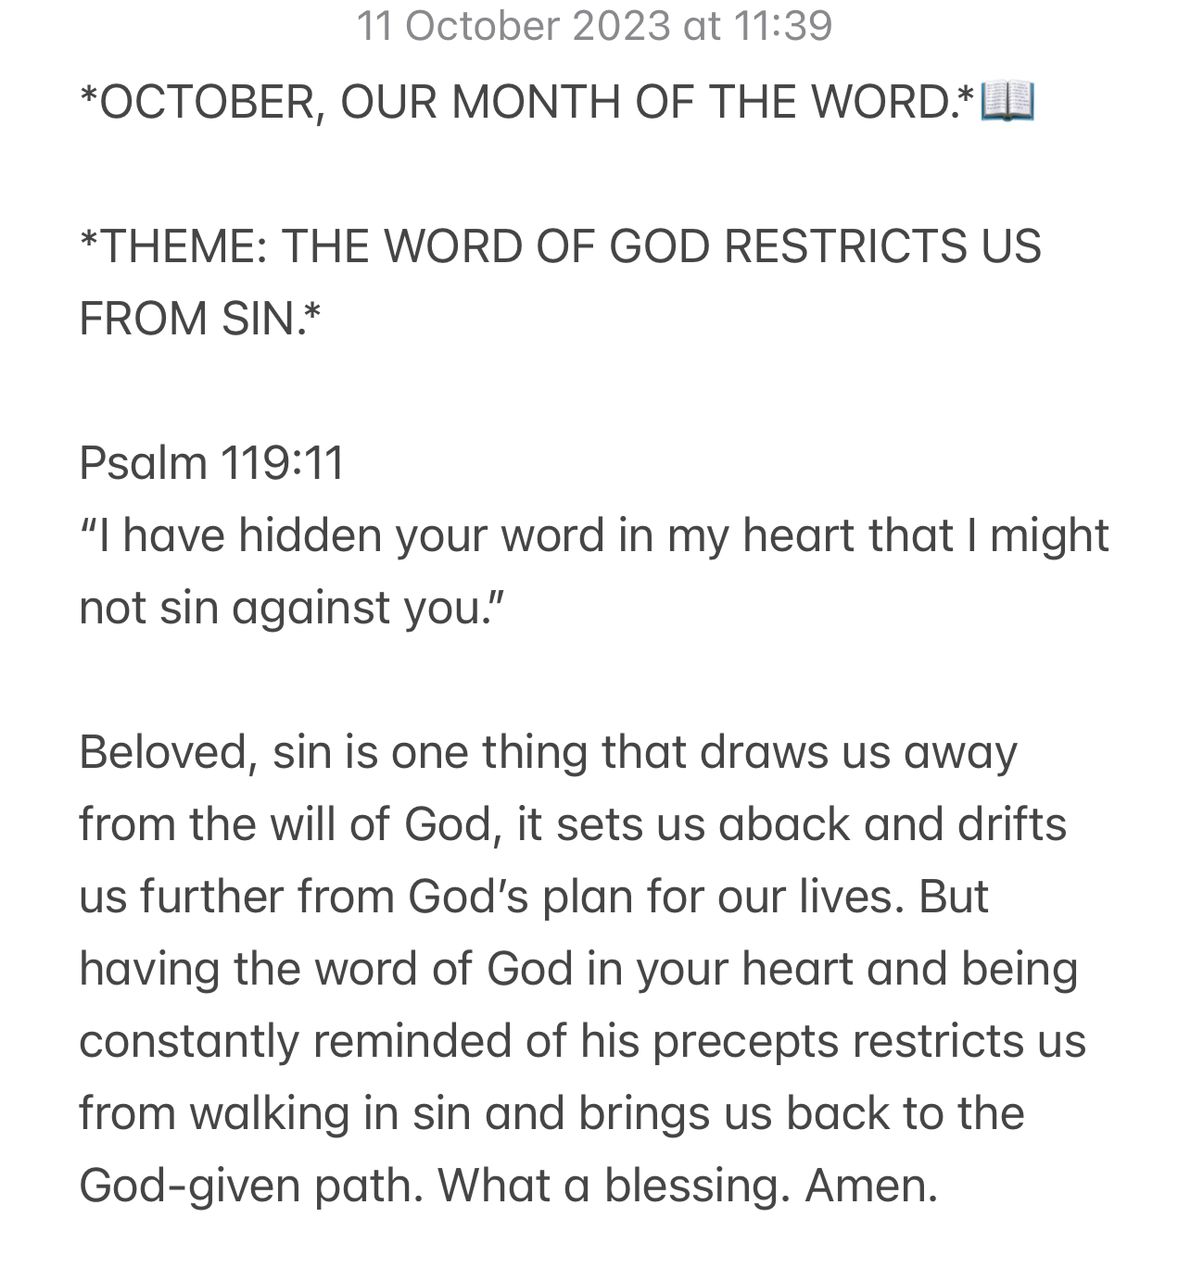 THE WORD OF GOD RESTRICTS US FROM SIN.